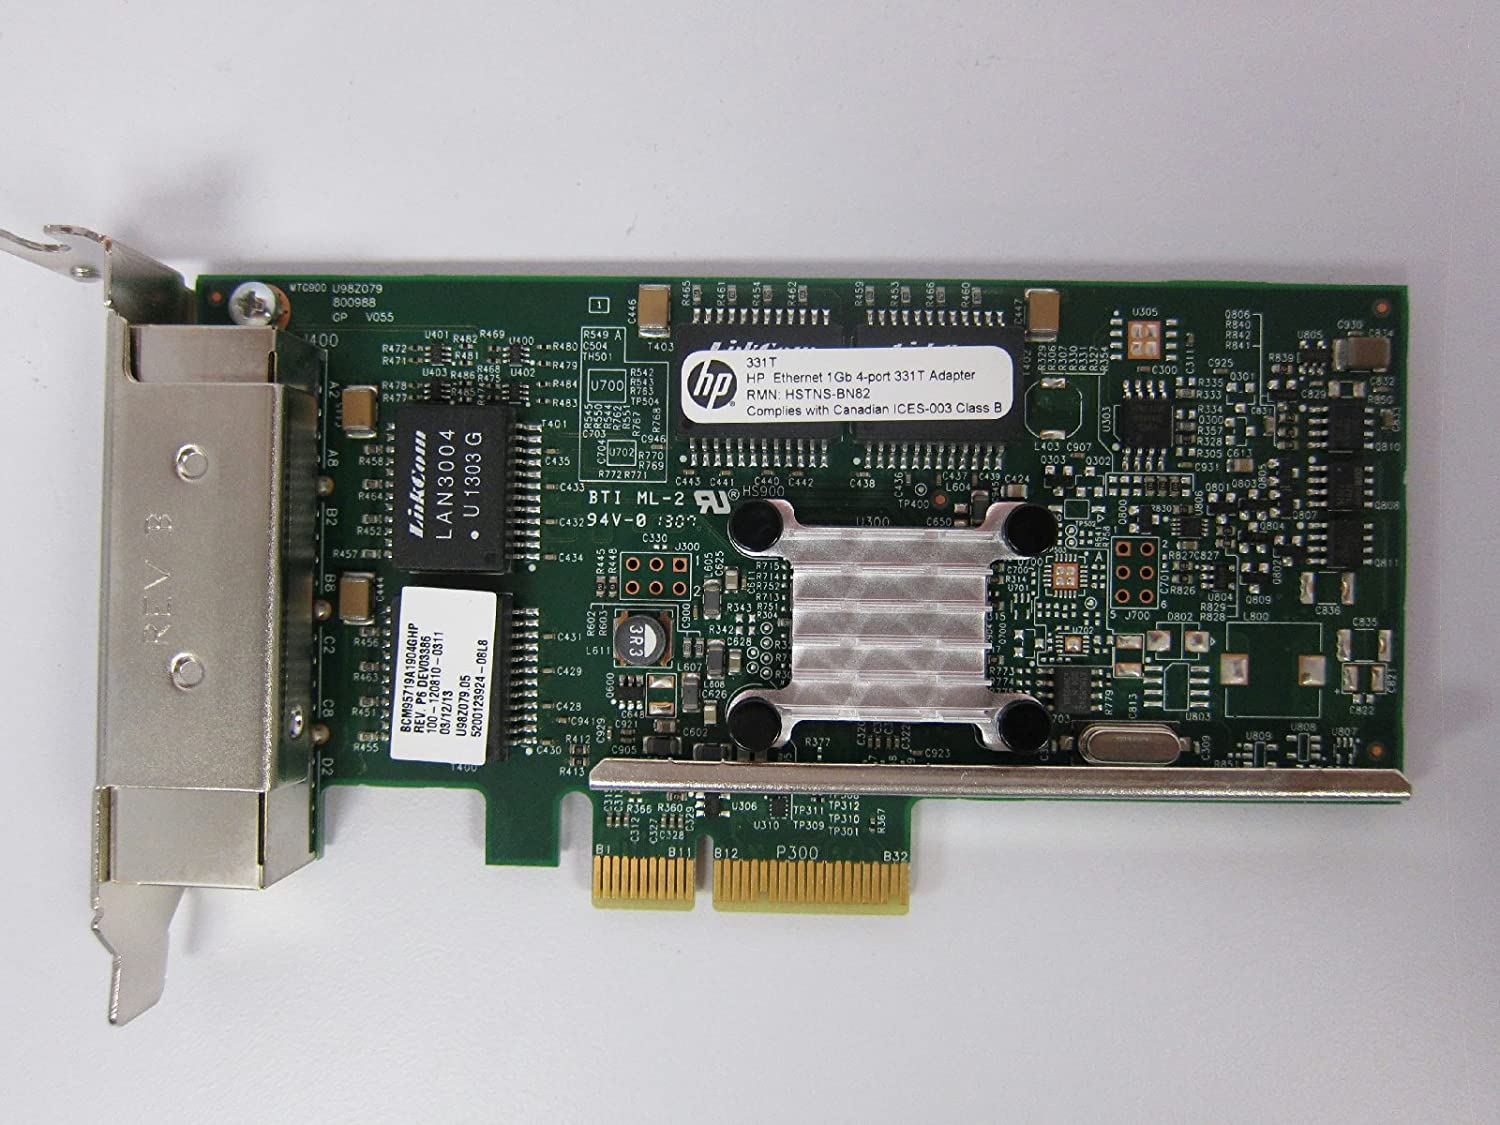 647594-B21 HPE Ethernet 1Gb 4-port 331T Adapter (HPE Spare #: 649871-001)